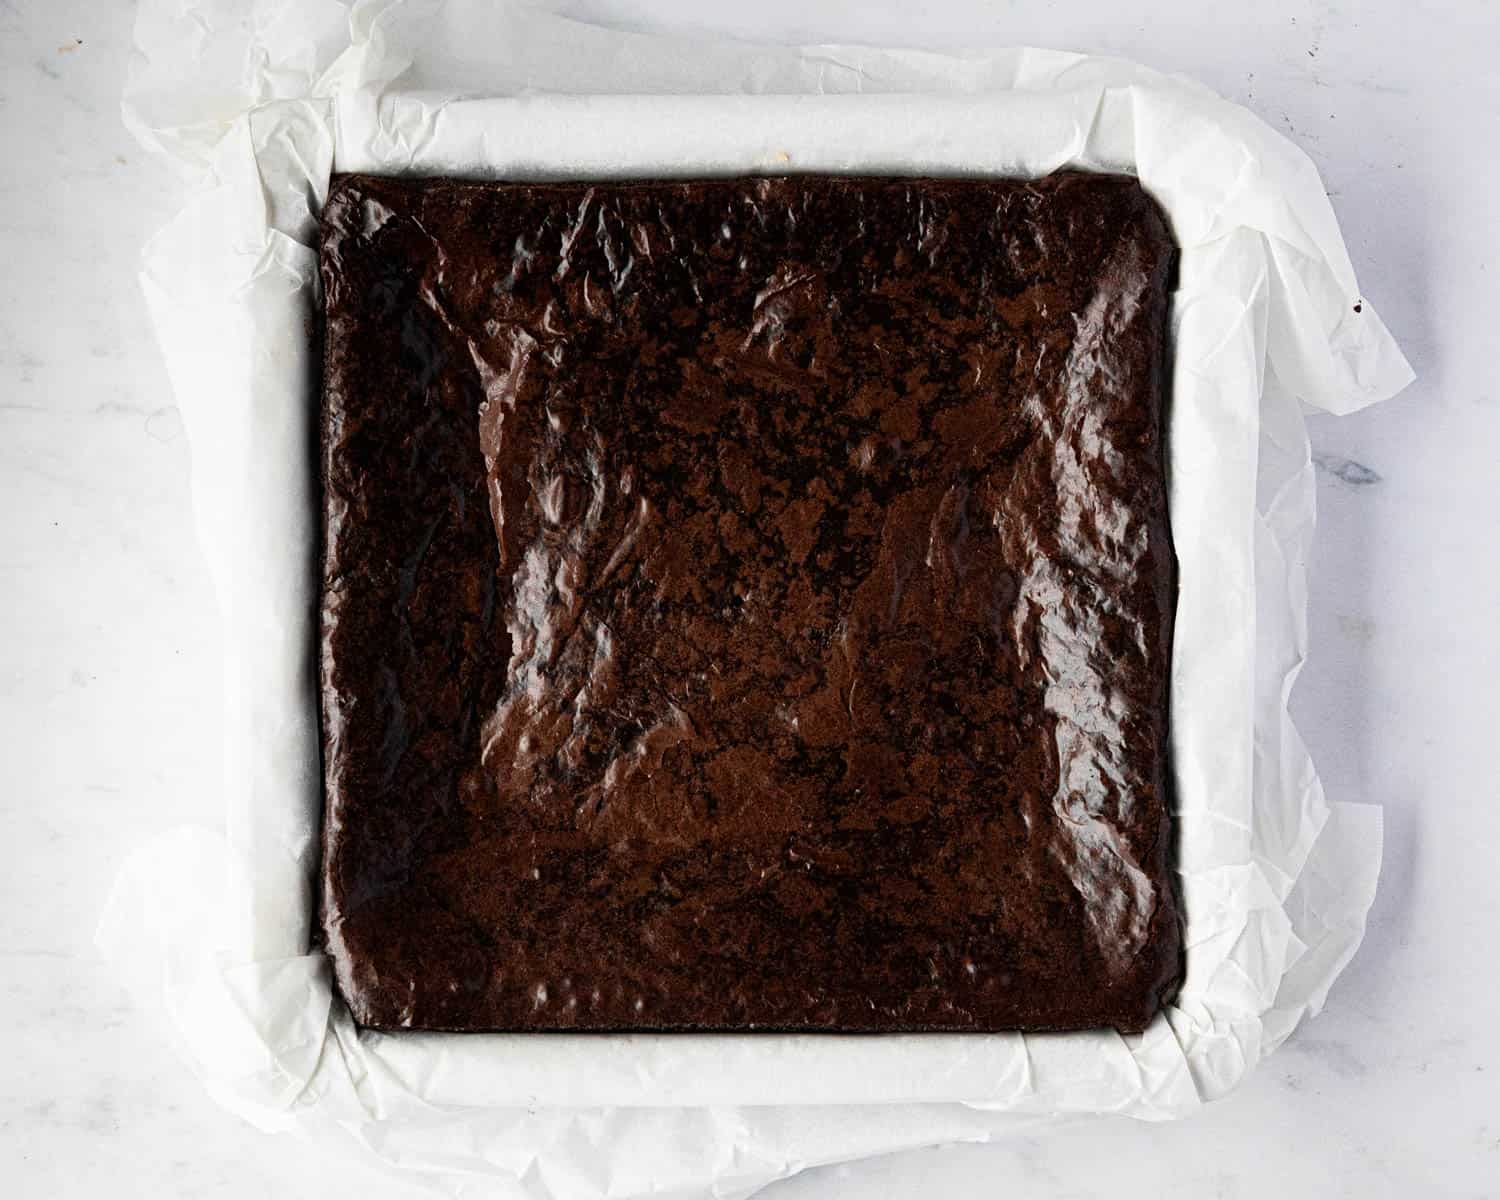 Step 9, the baked brownie.